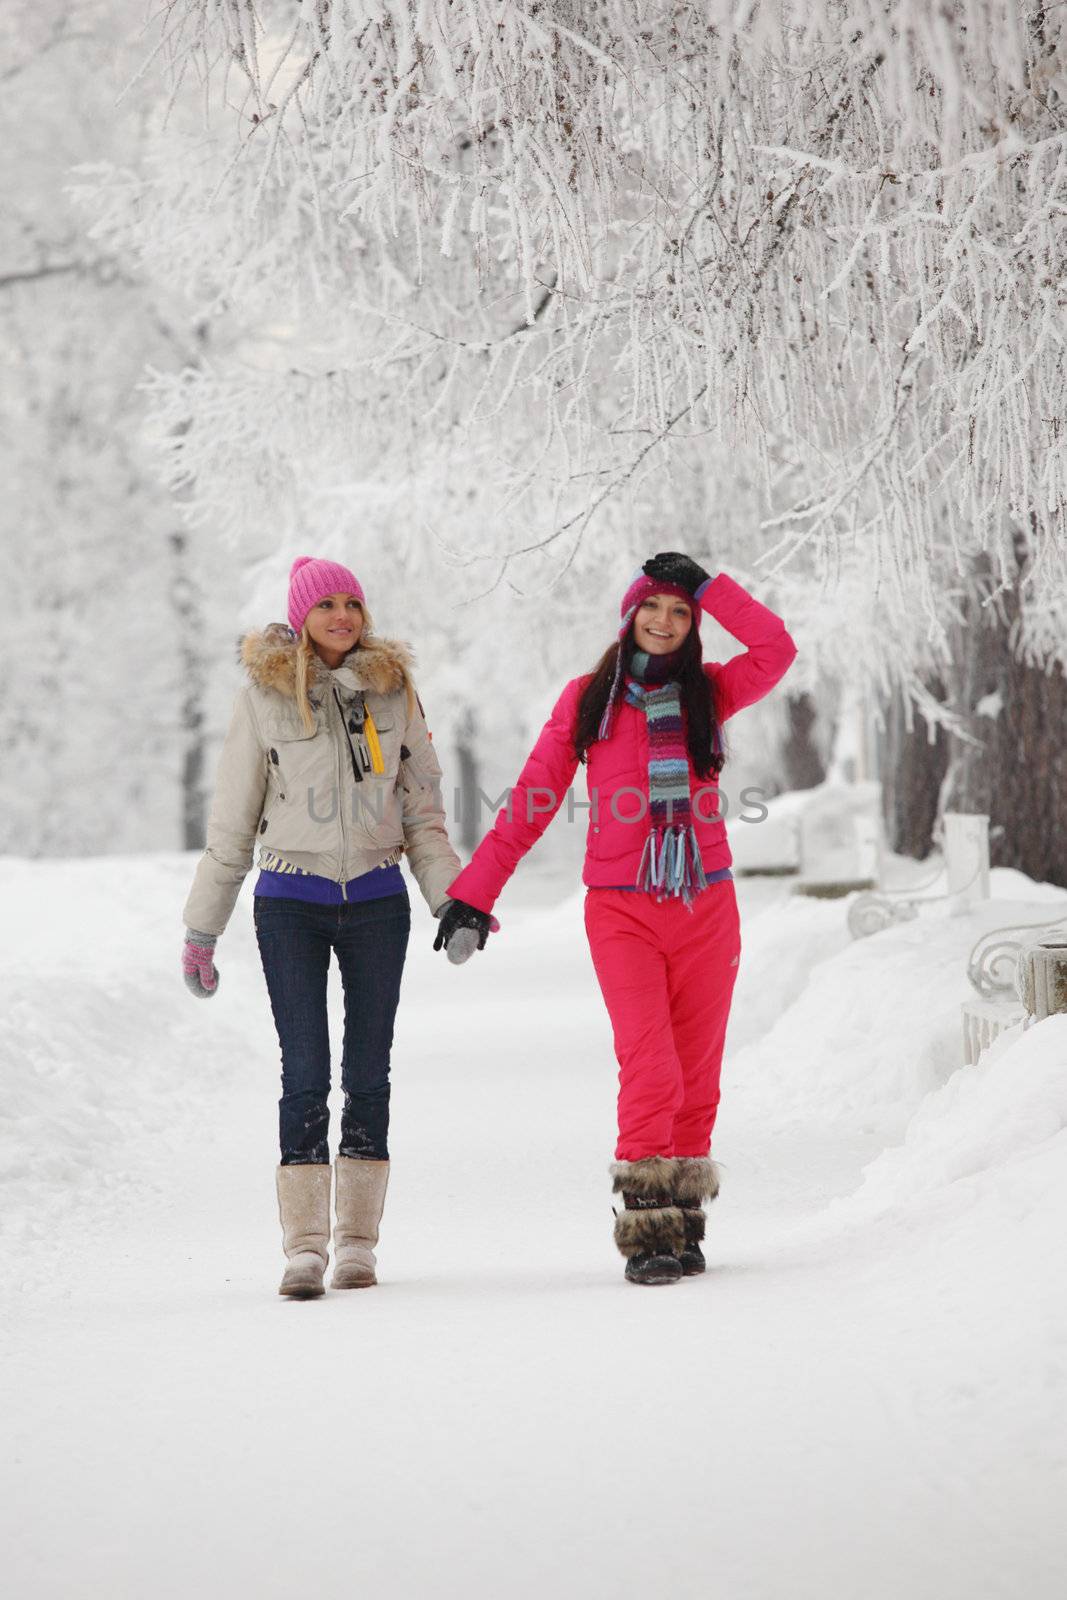 two winter women run by snow frosted alley